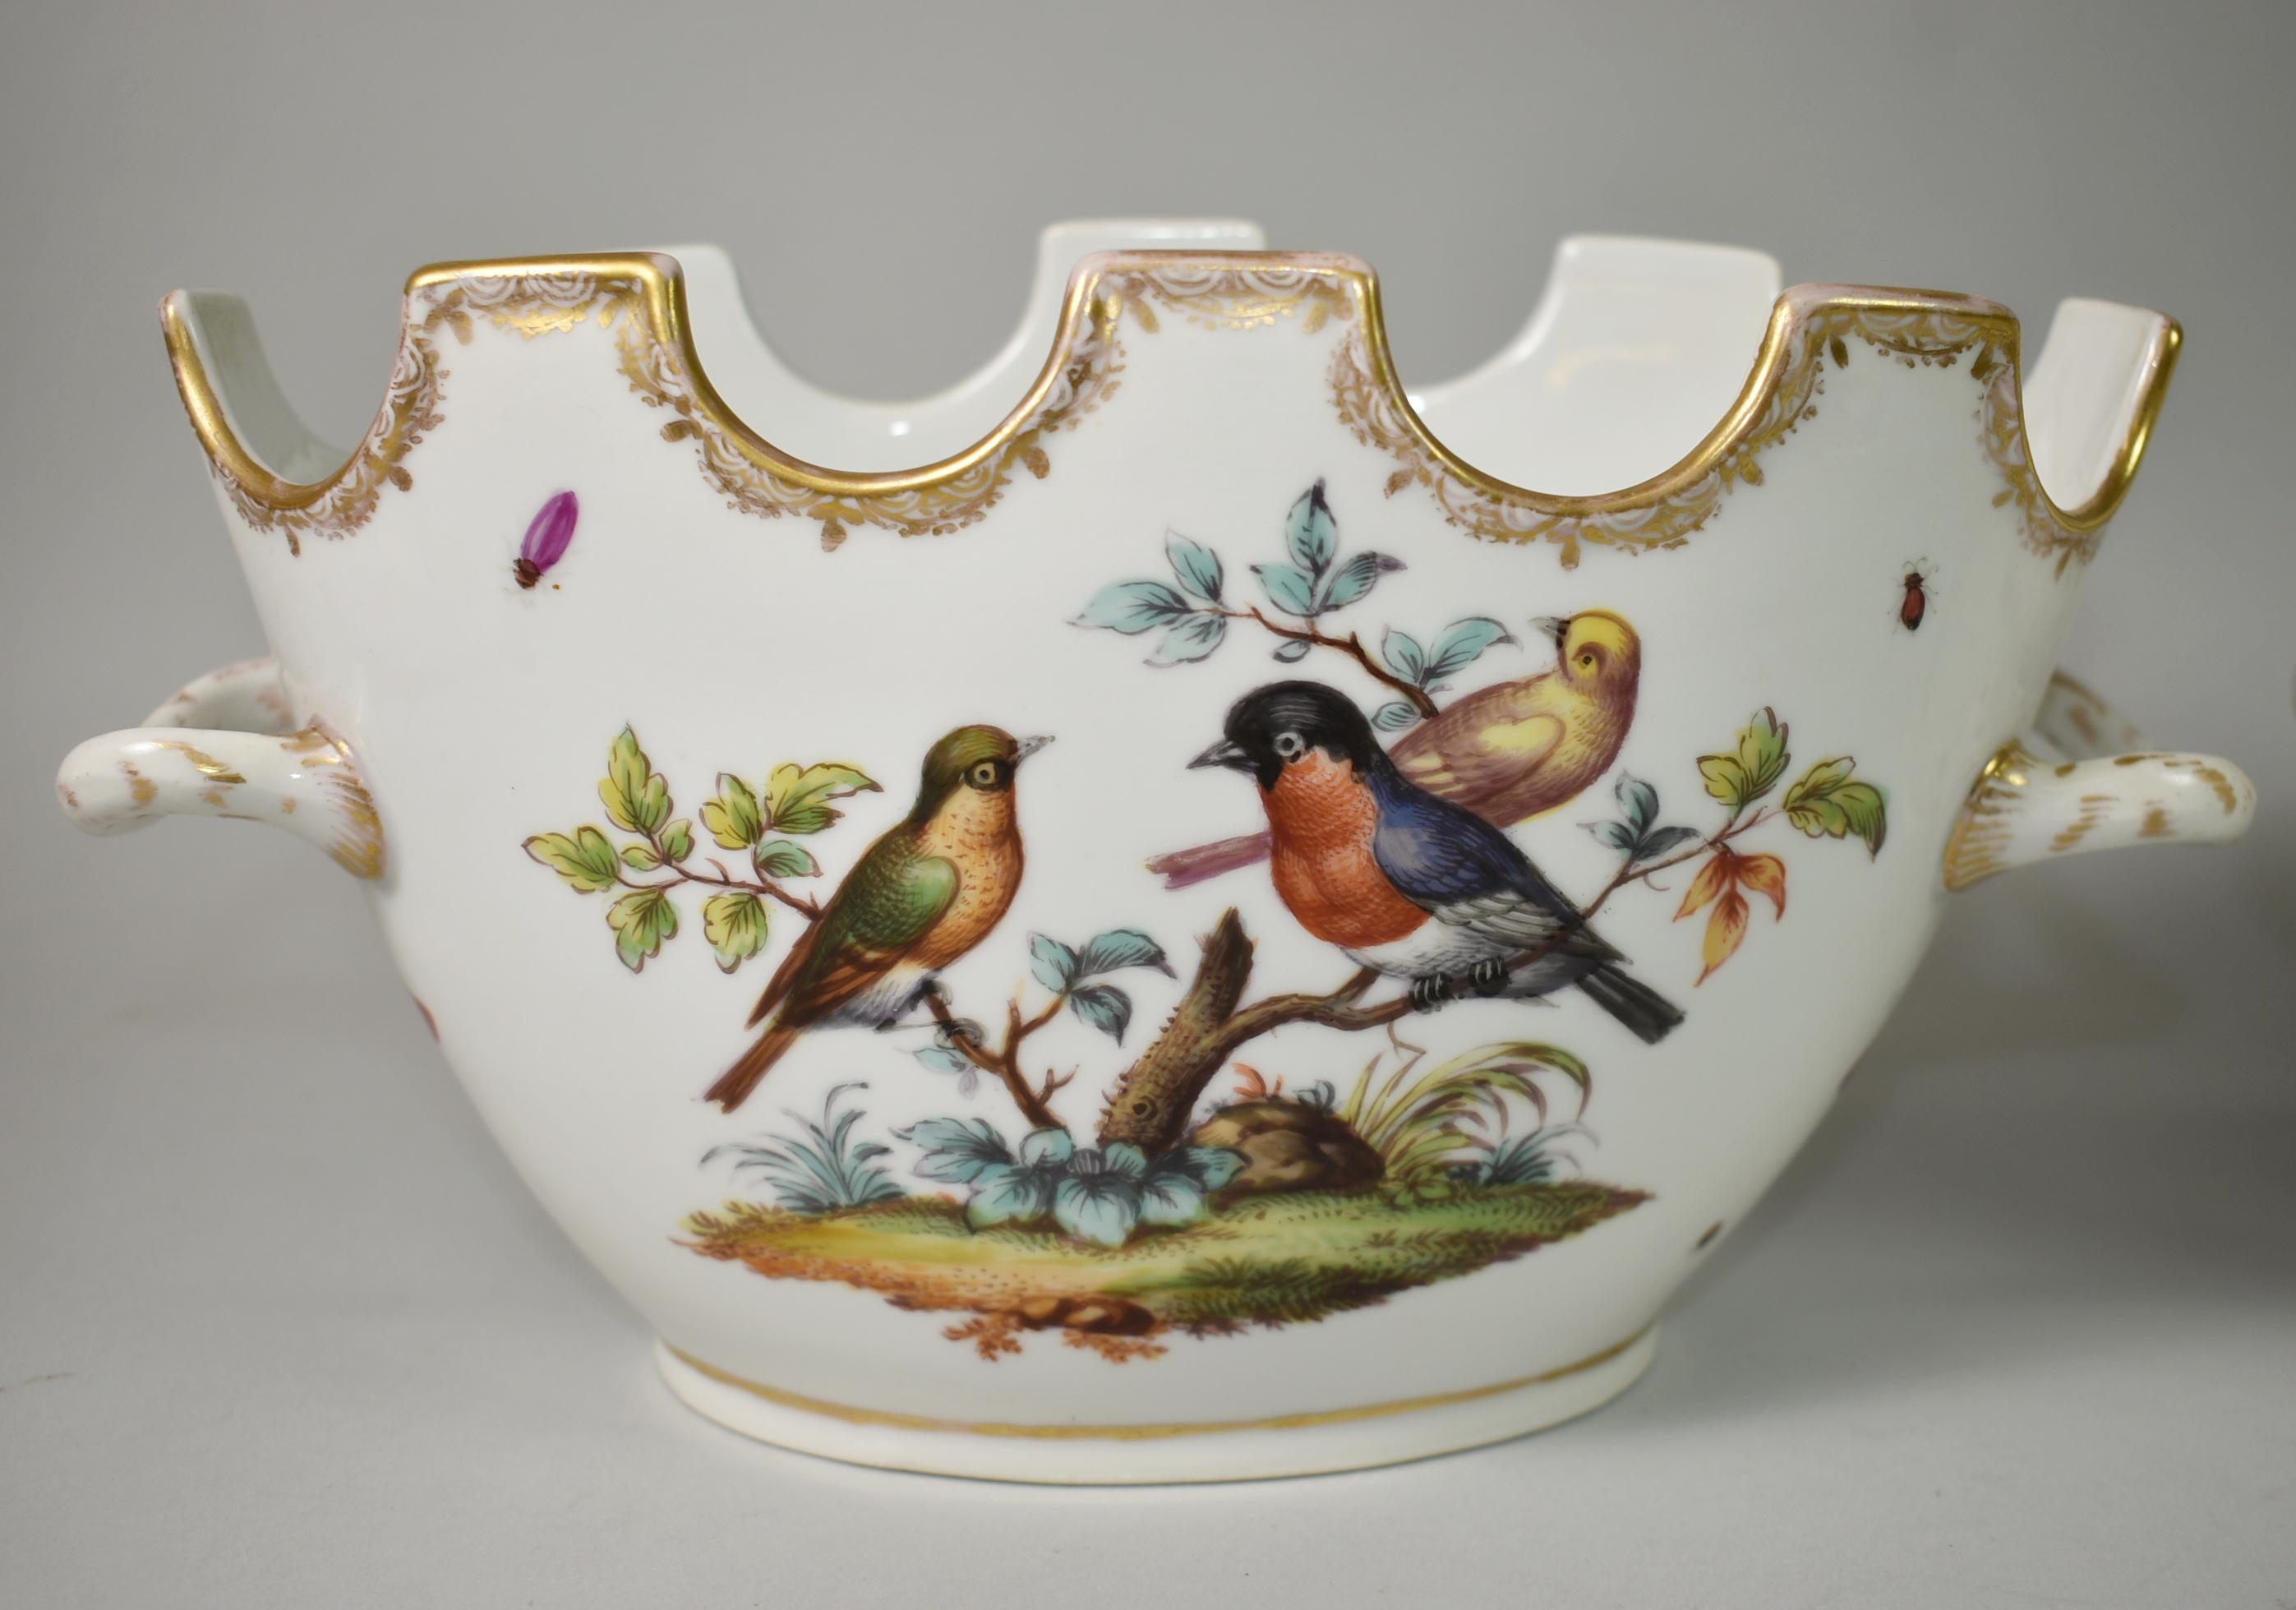 This pair of Augustus Rex cachepots have a different hand painted scene on each side. This pair is in the Rothschild bird pattern with birds, butterflies and insects. These cachepots have a gold painted rim at the top, the gold paint does have some